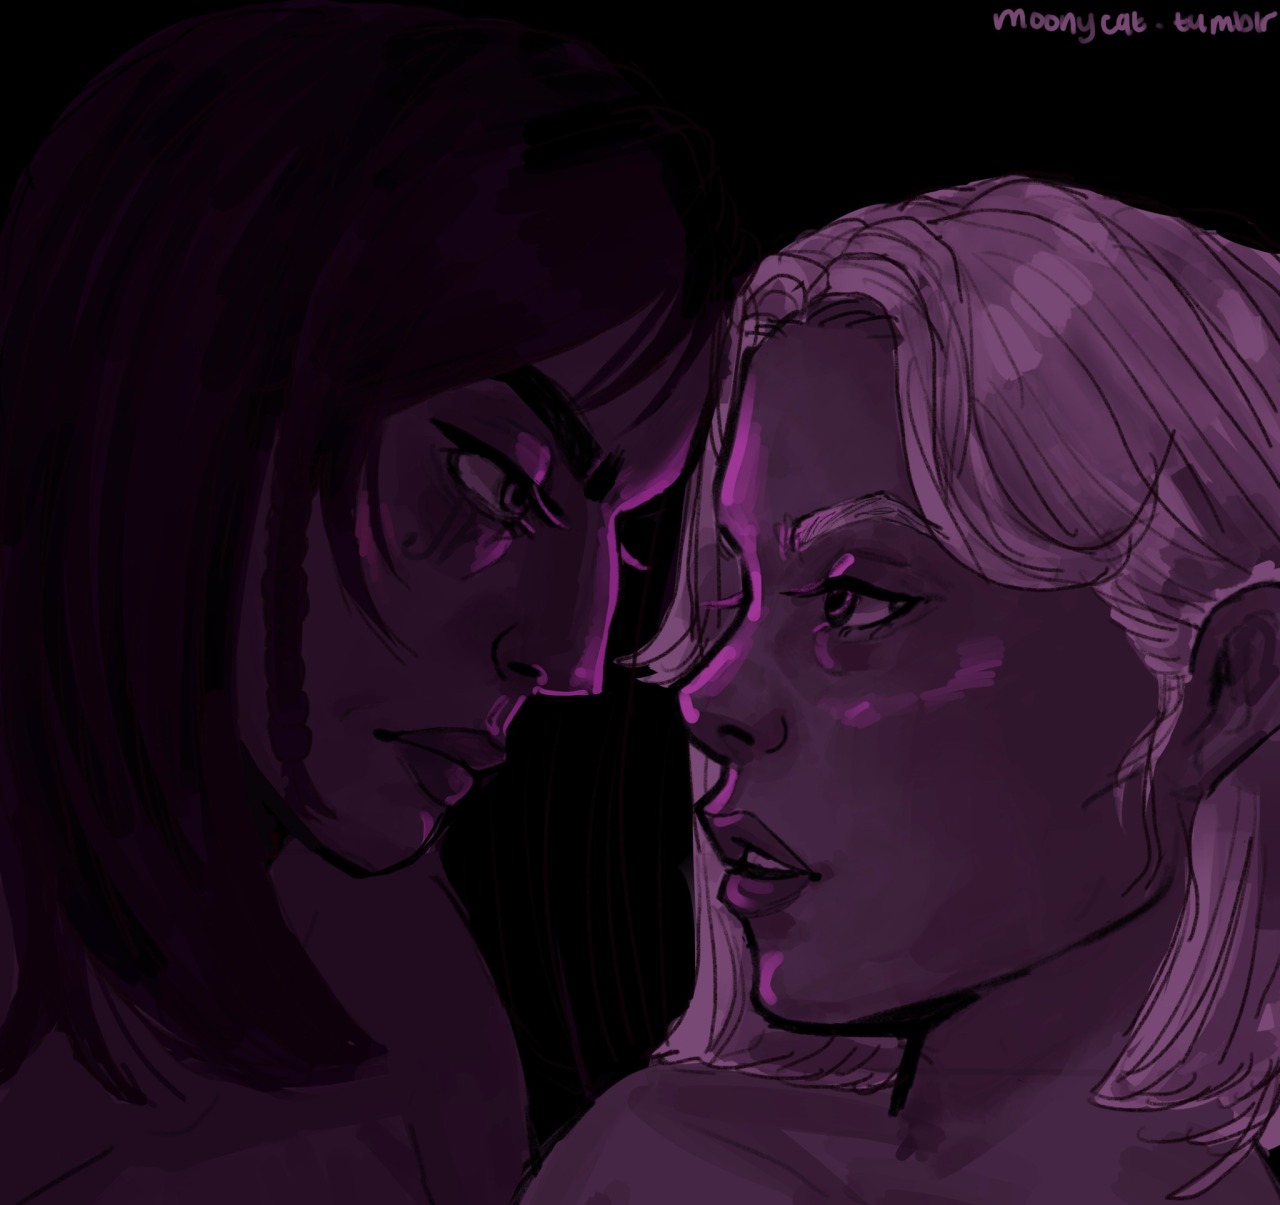 moonycats:pharmercy nation how are we feeling out there tonight